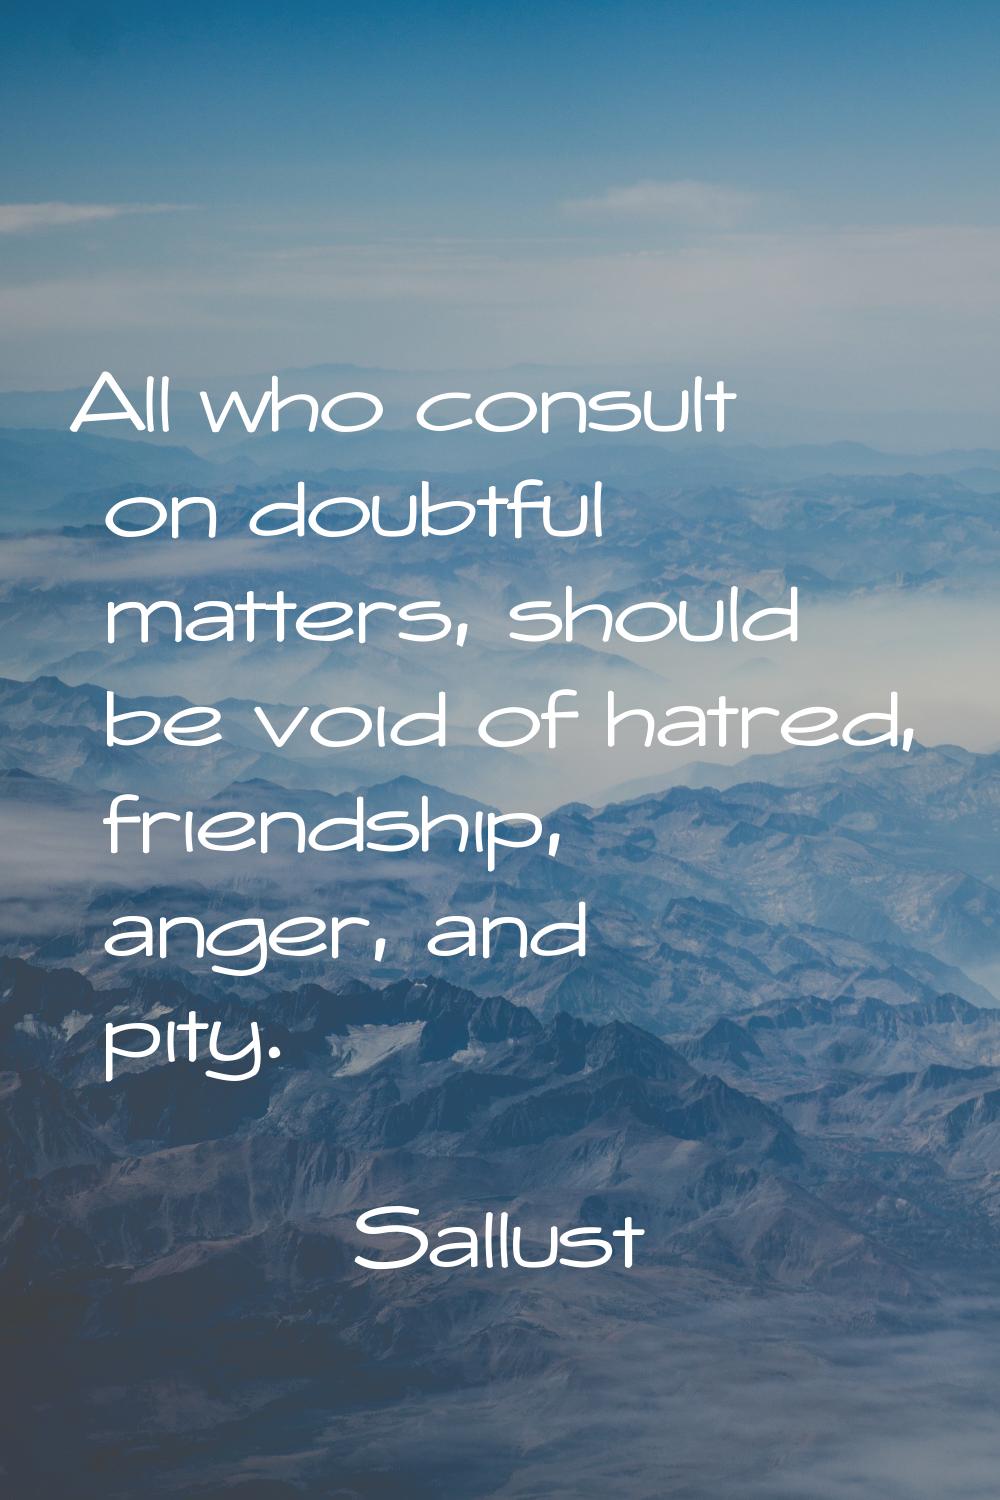 All who consult on doubtful matters, should be void of hatred, friendship, anger, and pity.